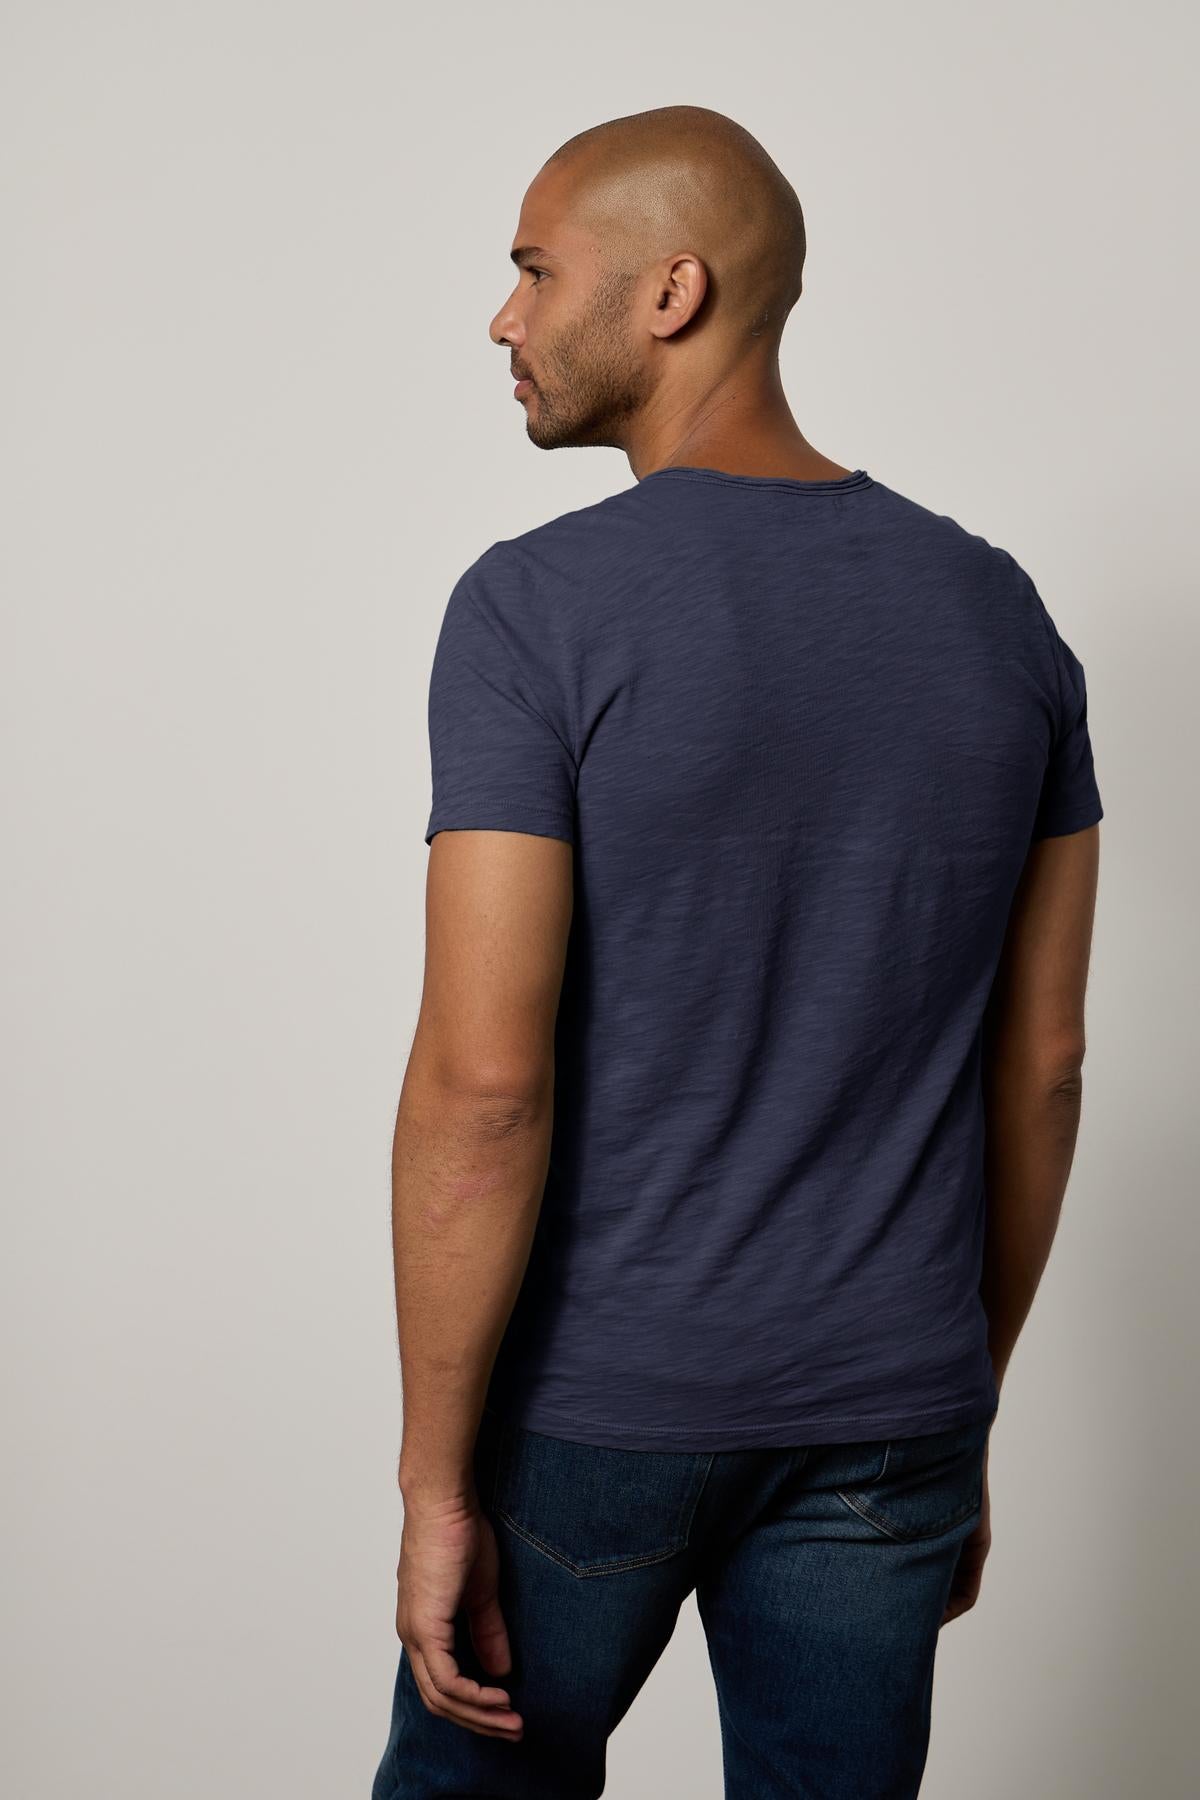 The back view of a man wearing a Velvet by Graham & Spencer CHAD RAW EDGE COTTON SLUB POCKET TEE.-26146501296321